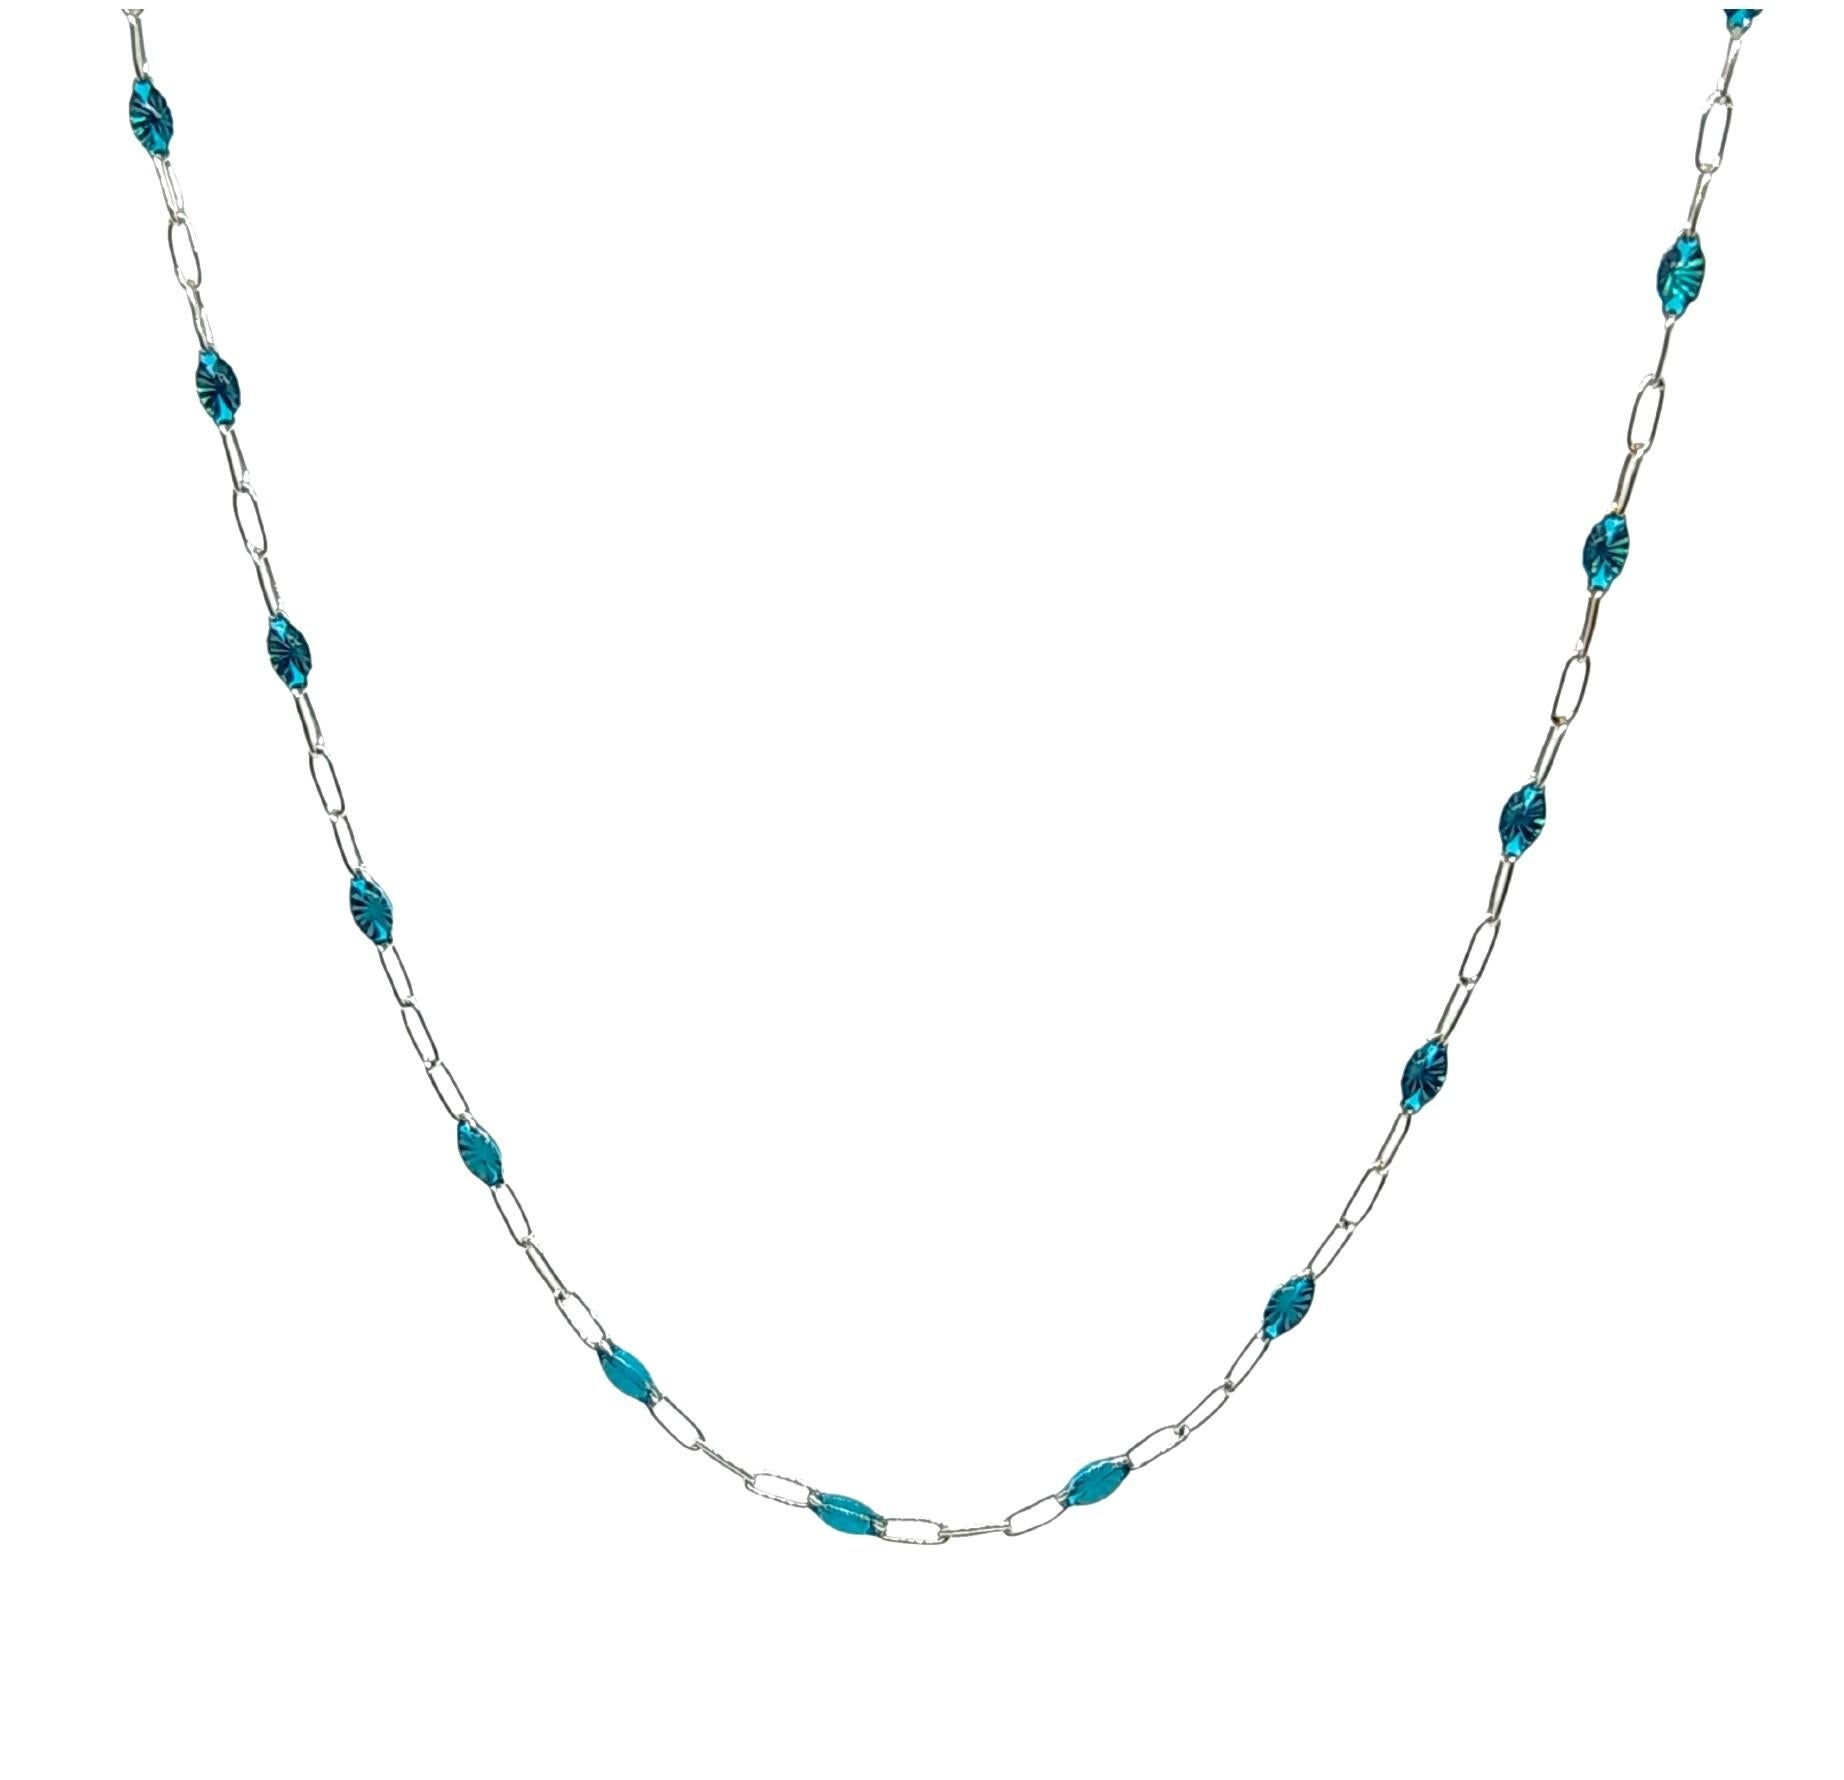 A 25 Inch Sterling Silver Italian chain with translucent  teal enameled eye shape stations that elegantly are placed every half of an inch. Because the enamel is transparent, a diamond cut star is visible adding some sparkle. The silver chain is